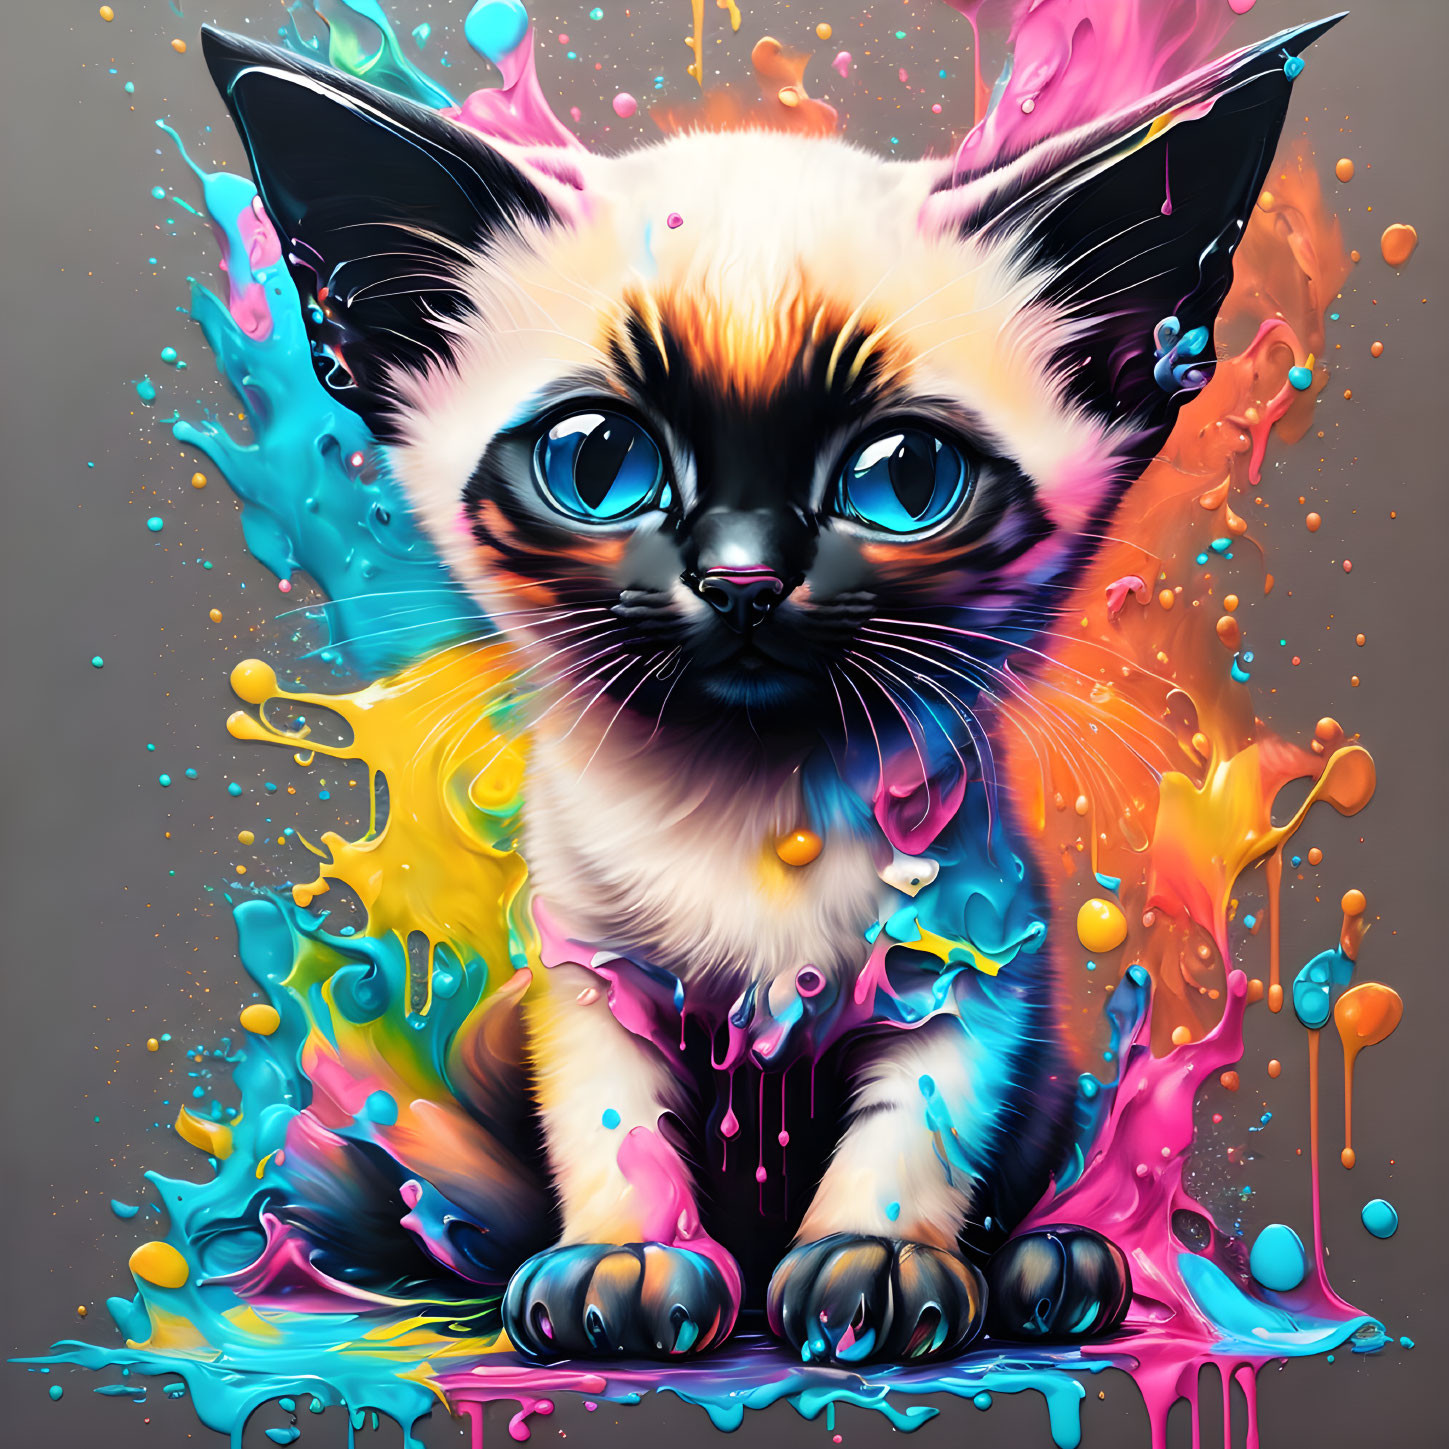 Colorful Illustration: Kitten with Expressive Eyes and Paint Splashes